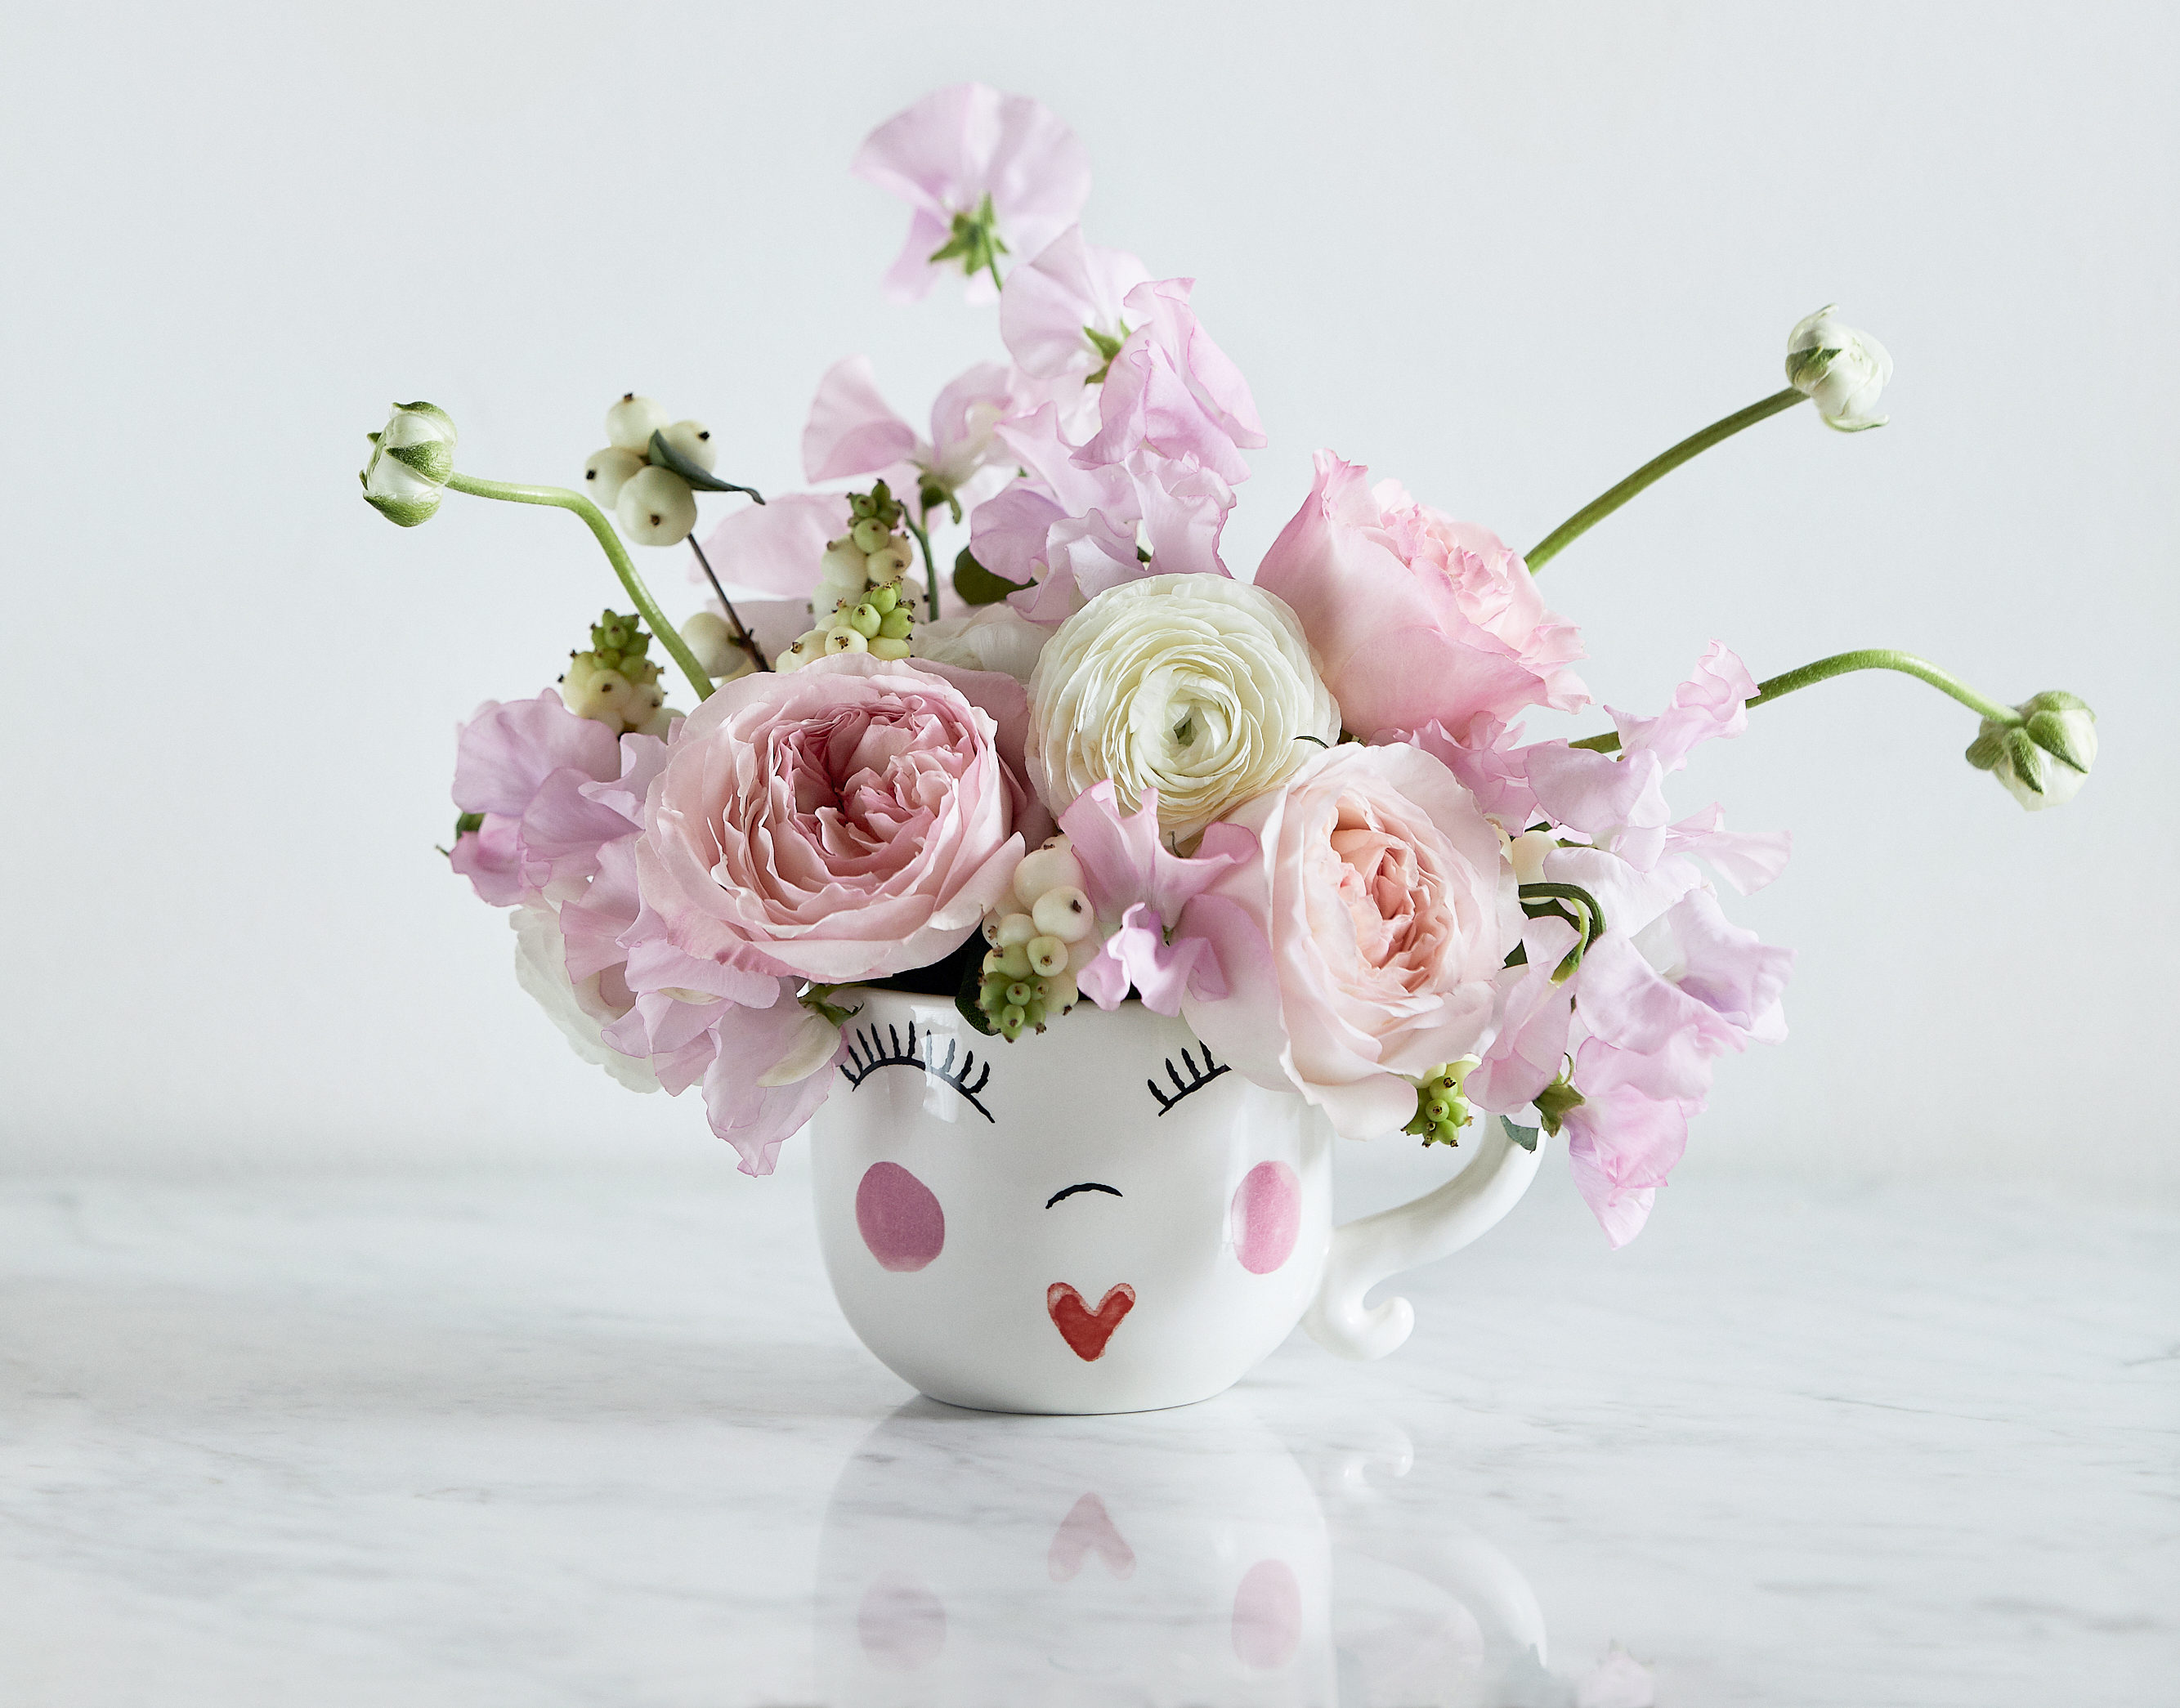 Smiley mug filled with sweet peas and garden roses